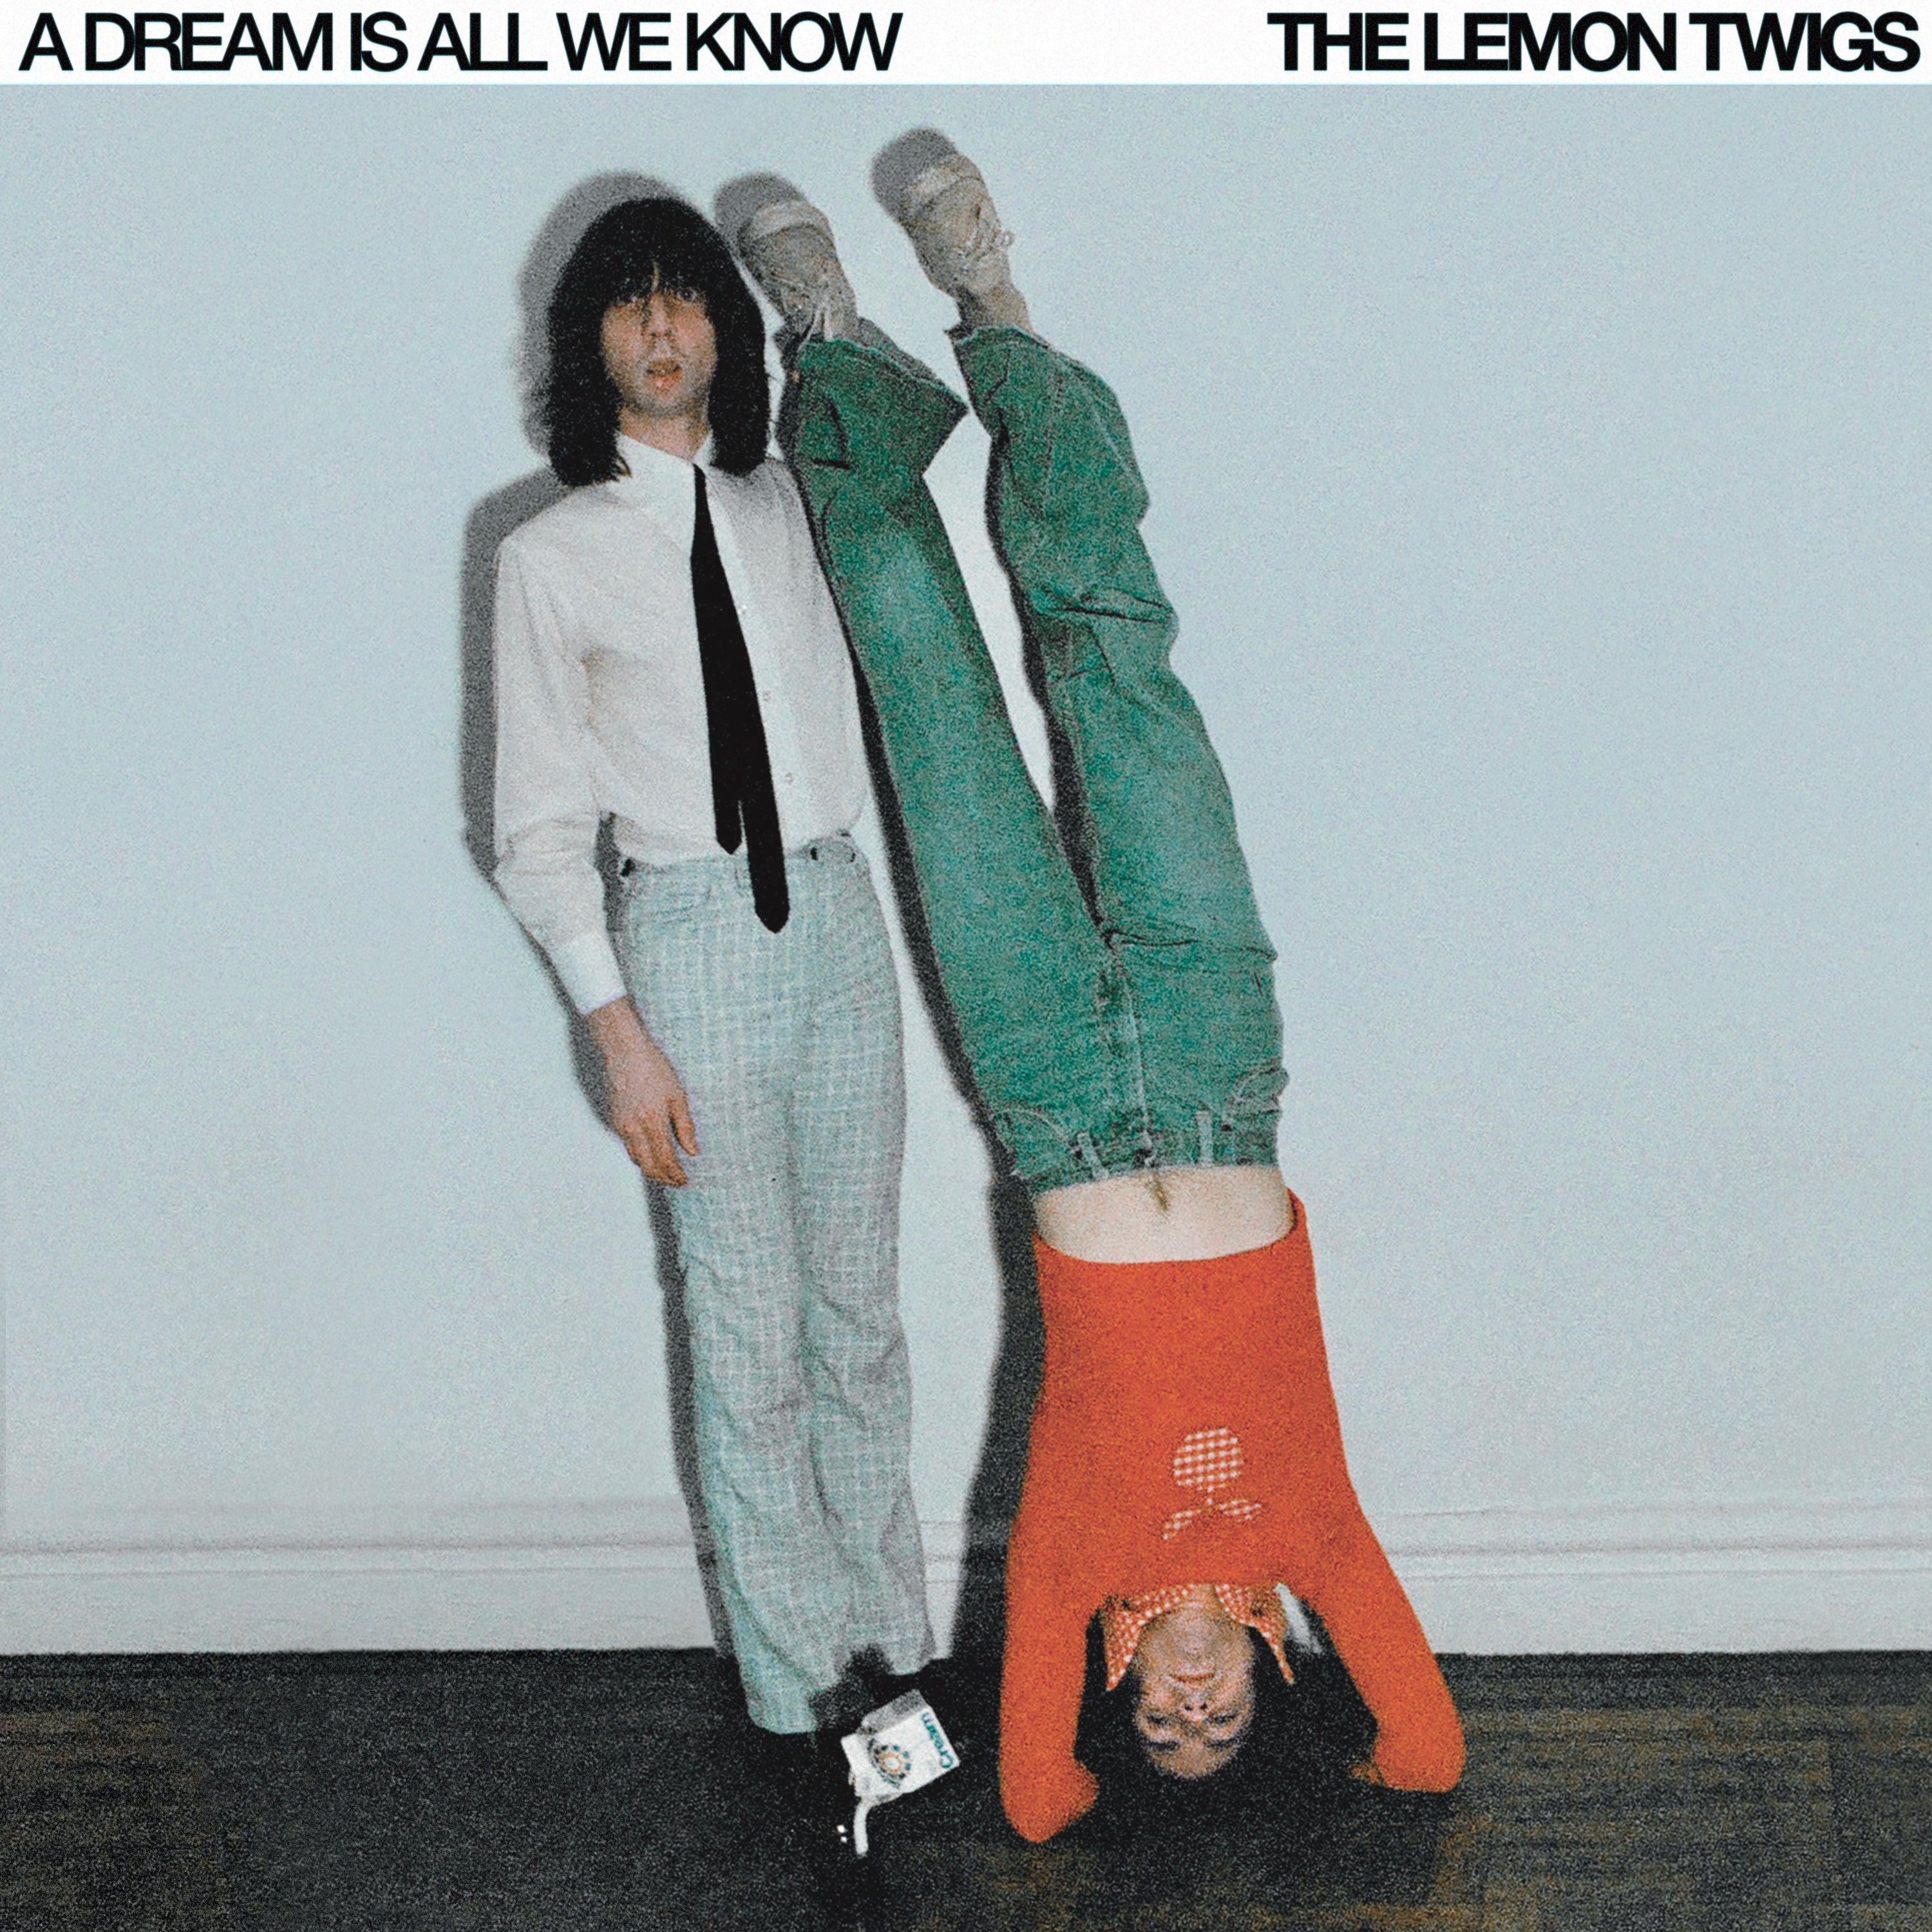 The Lemon Twigs - A Dream Is All We Know: Limited 'Ice Cream' Vinyl LP